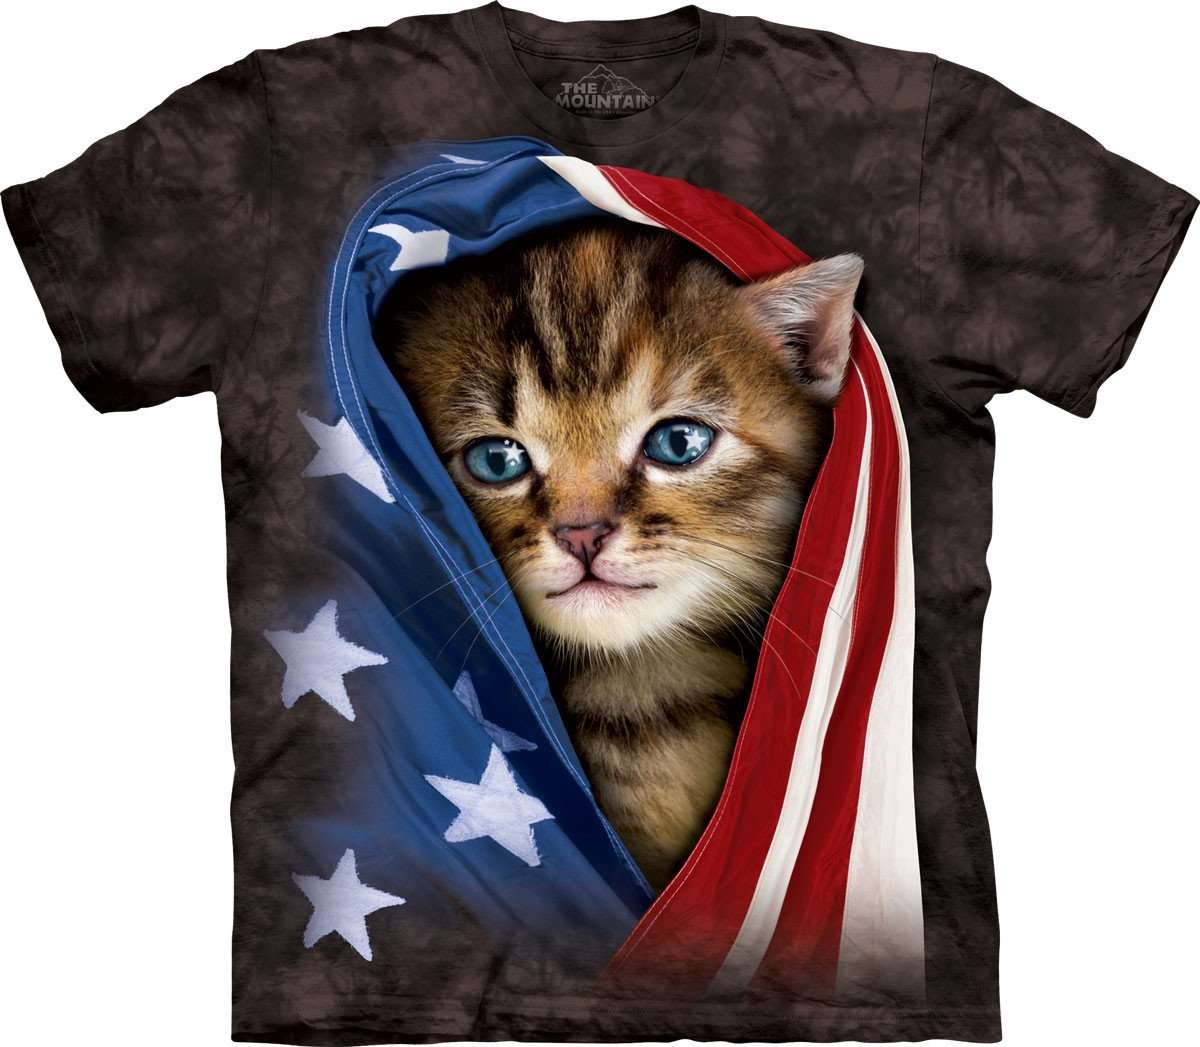 Designs by MyUtopia Shout Out:Patriotic Kitten Wrapped in an American Flag Tee Shirt by The Mountain,Small / Black,Adult Unisex T-Shirt